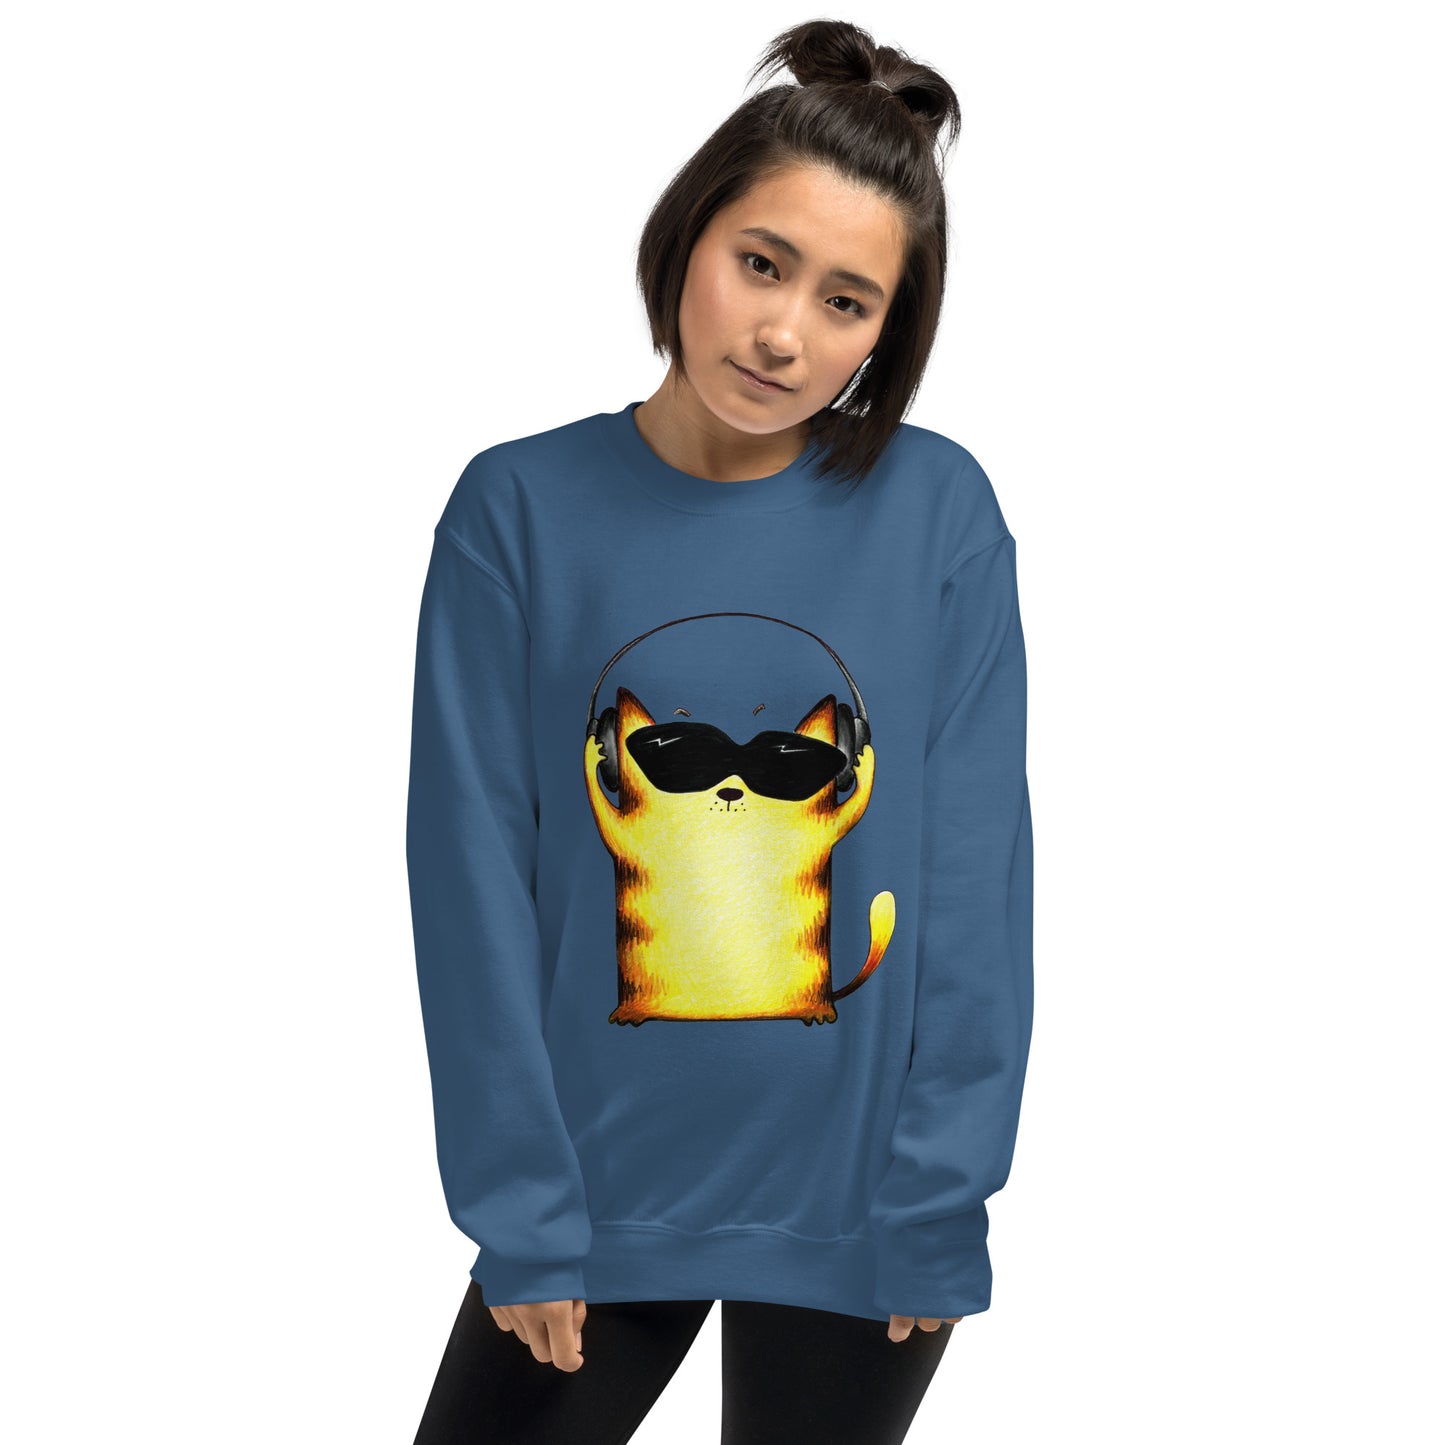 Blue swearshirt with Cat and headphones